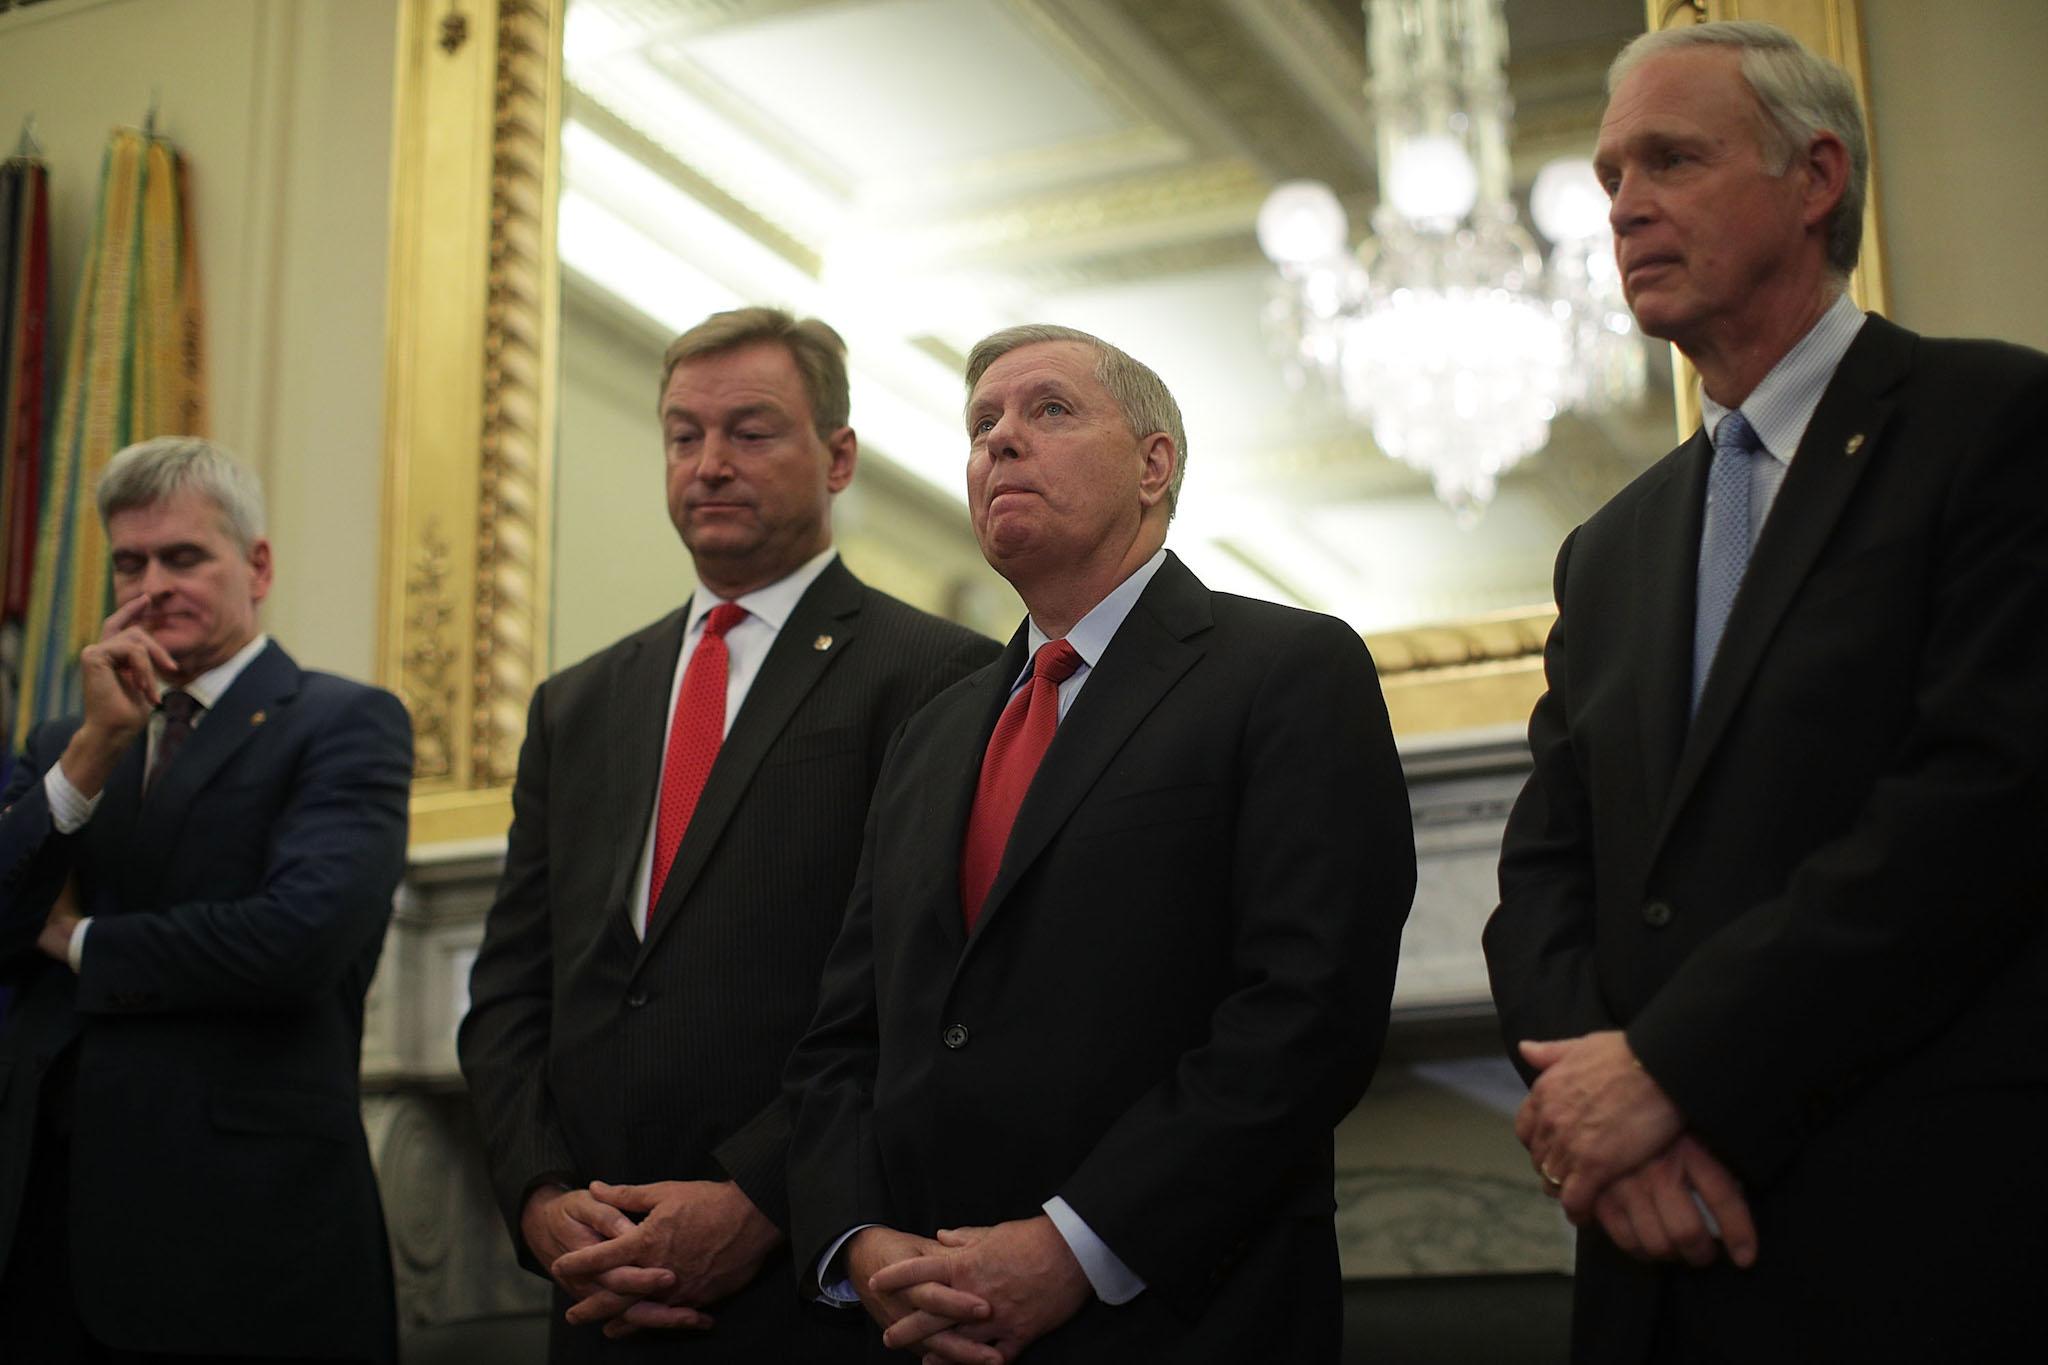 Senators Lindsey Graham, Bill Cassidy, Dean Heller and Ron Johnson unveiled proposed legislation to repeal and replace Obamacare